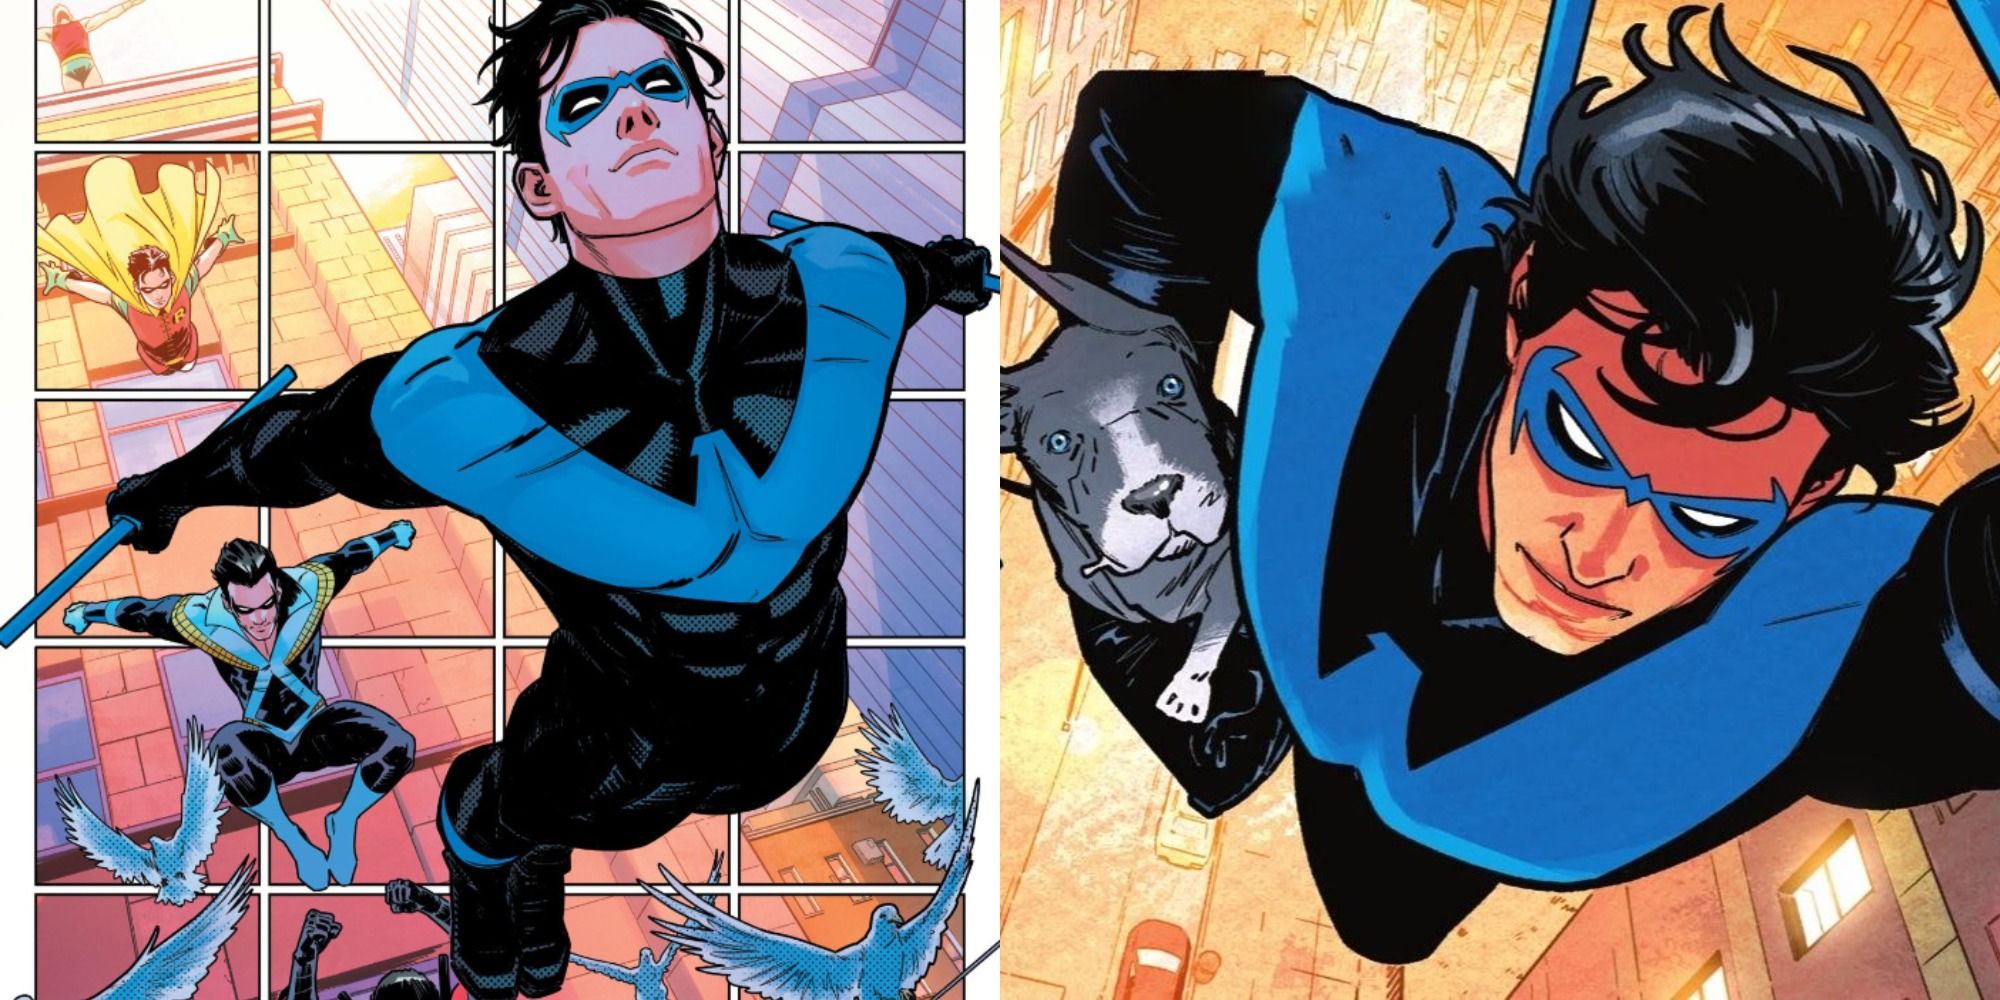 Split image showing Nightwing jumping off a building and flying with Haly the dog in the comics